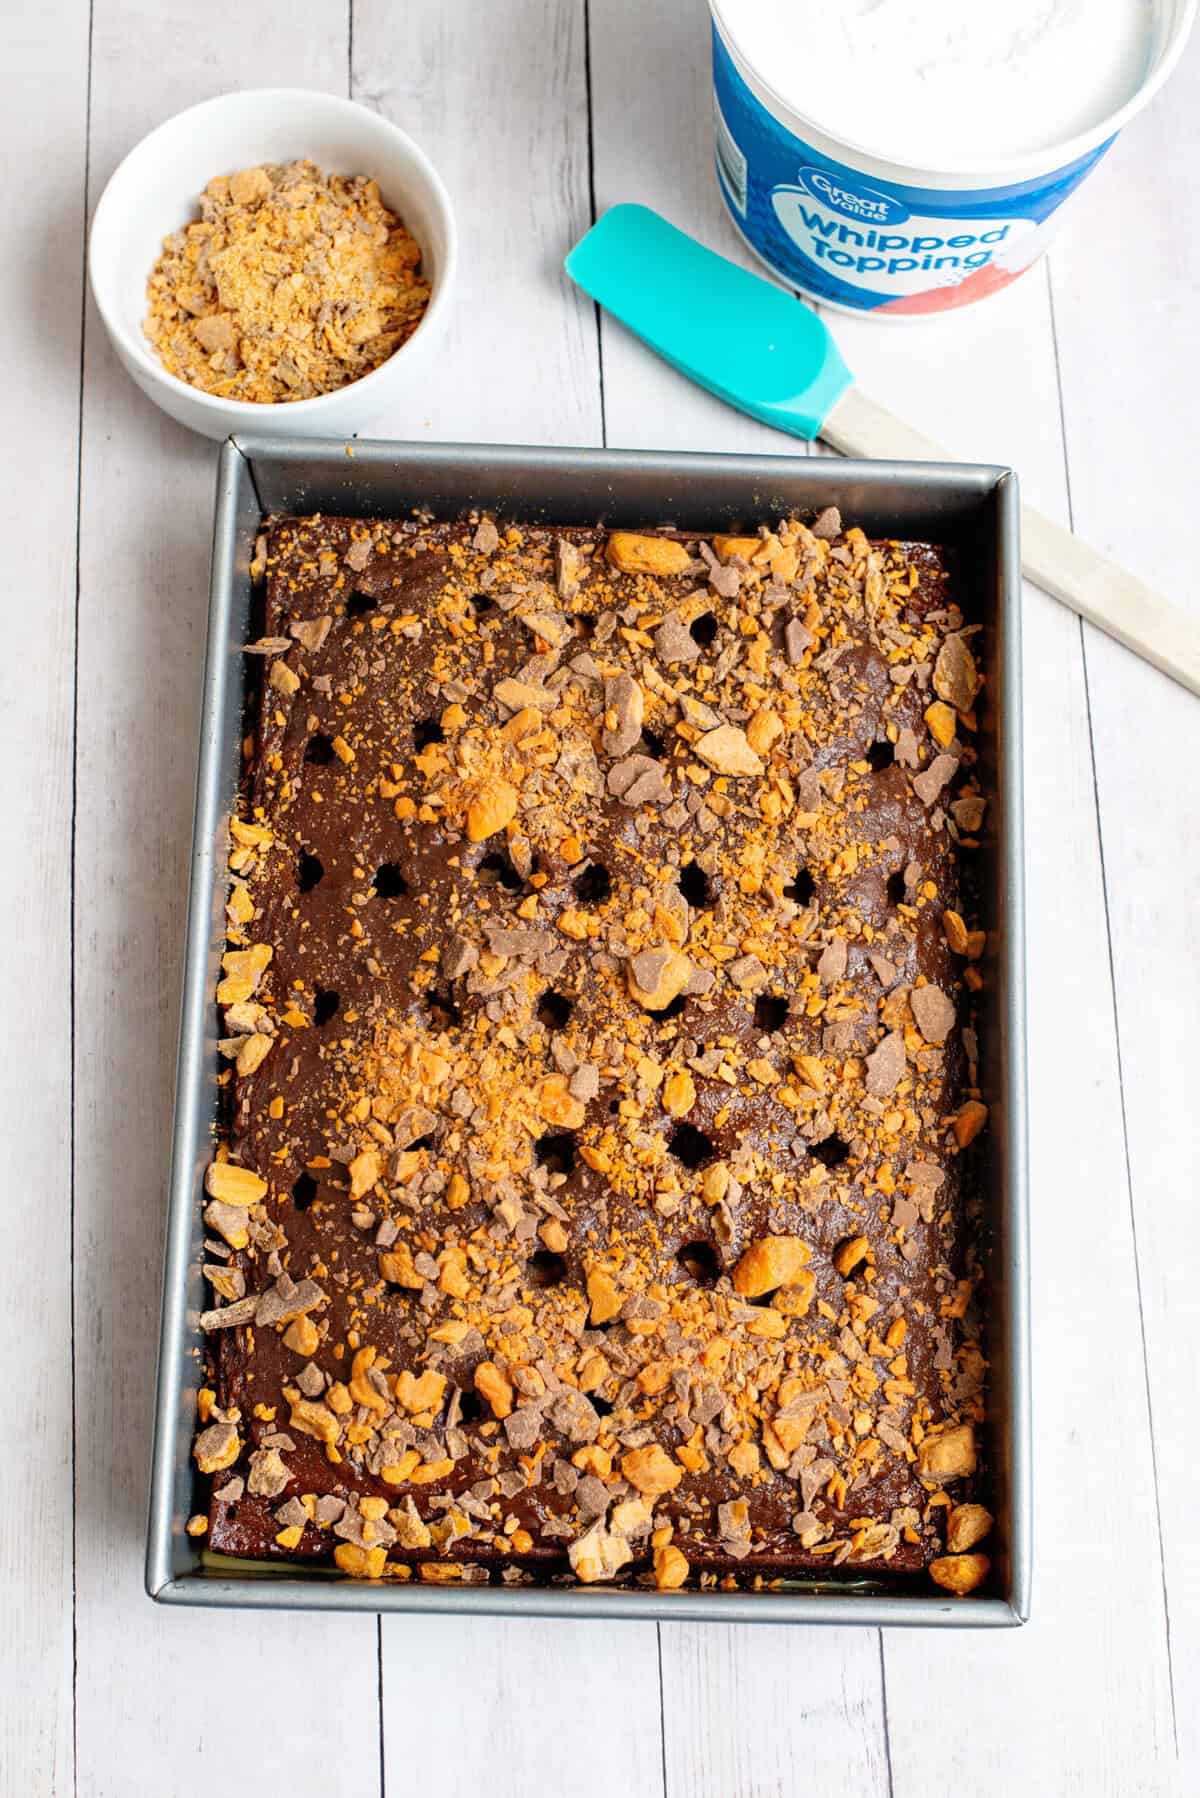 crumble butterfinger and spread over cake